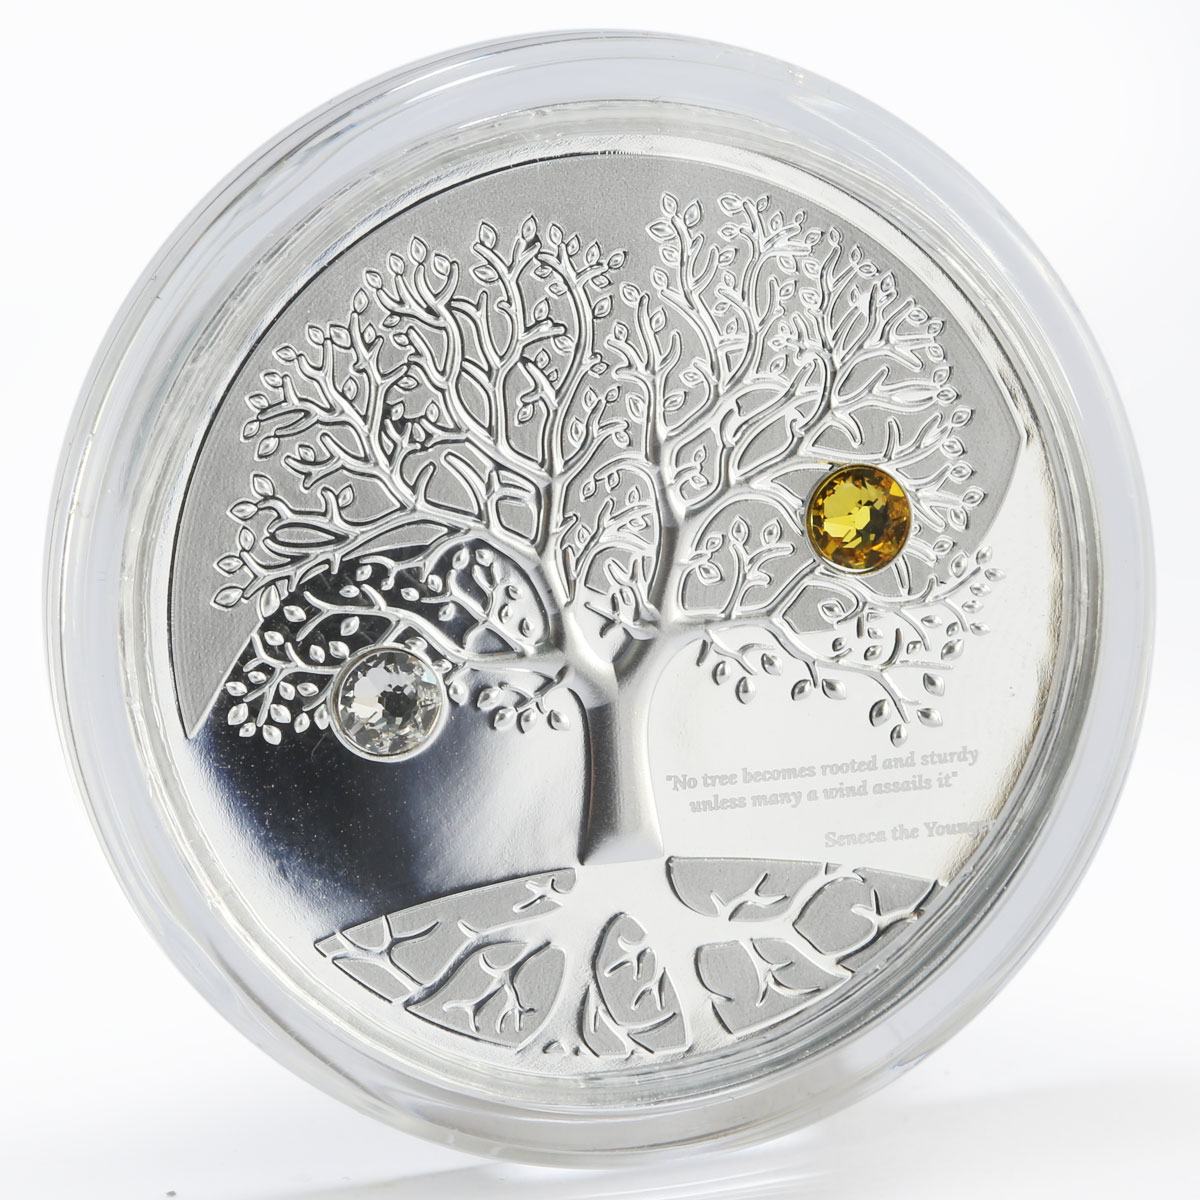 Cameroon 500 francs The Tree of Life swarowski crystals silver coin 2019